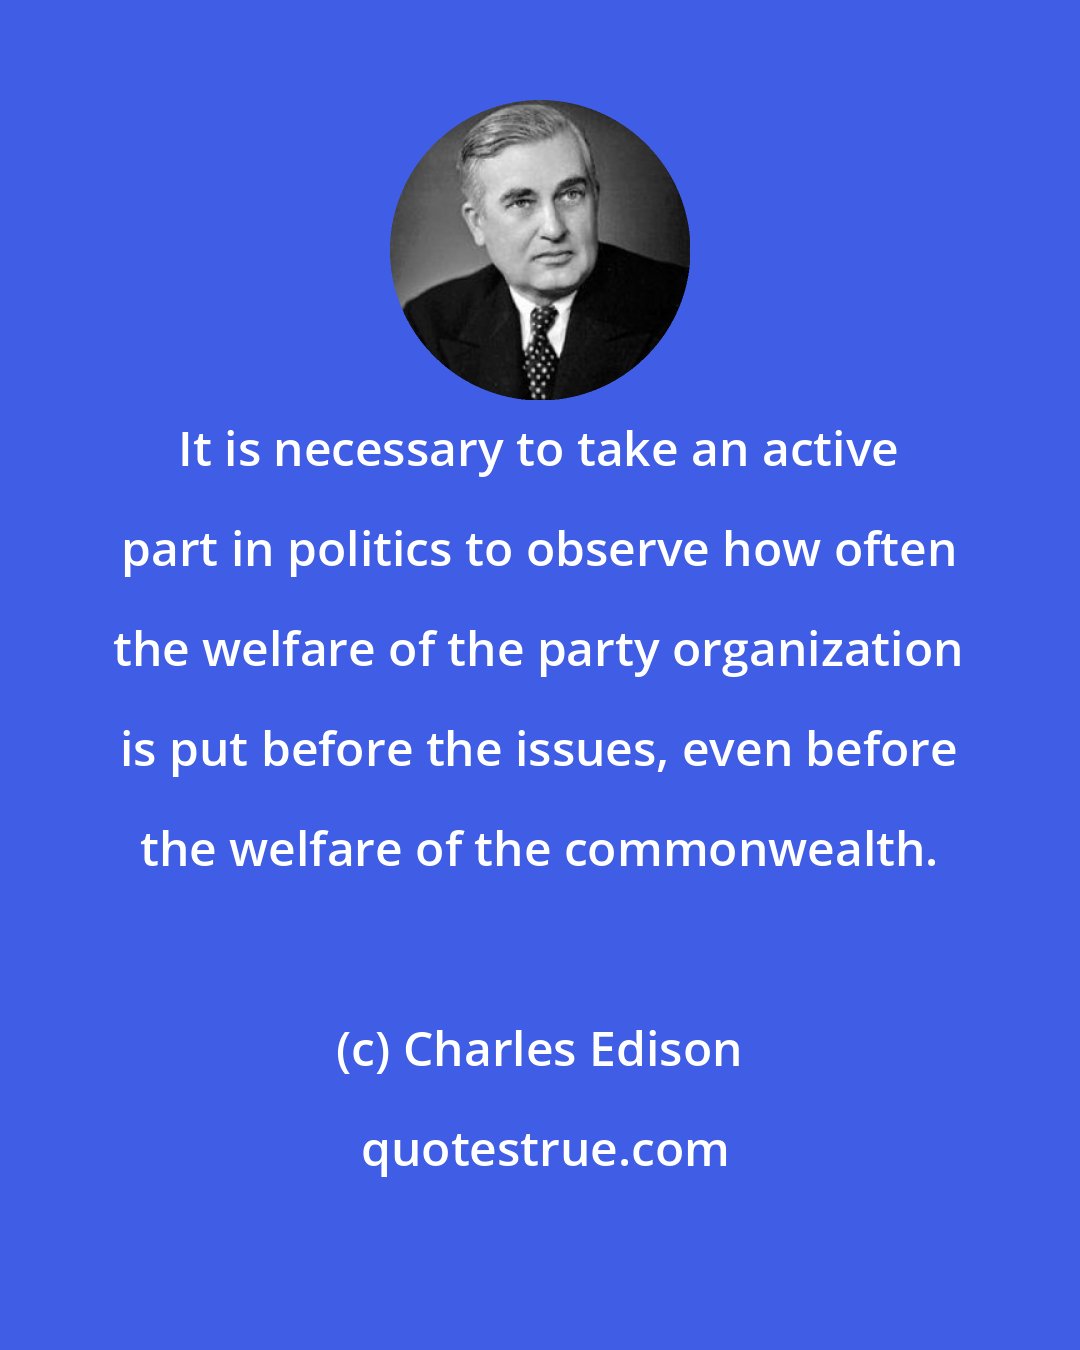 Charles Edison: It is necessary to take an active part in politics to observe how often the welfare of the party organization is put before the issues, even before the welfare of the commonwealth.